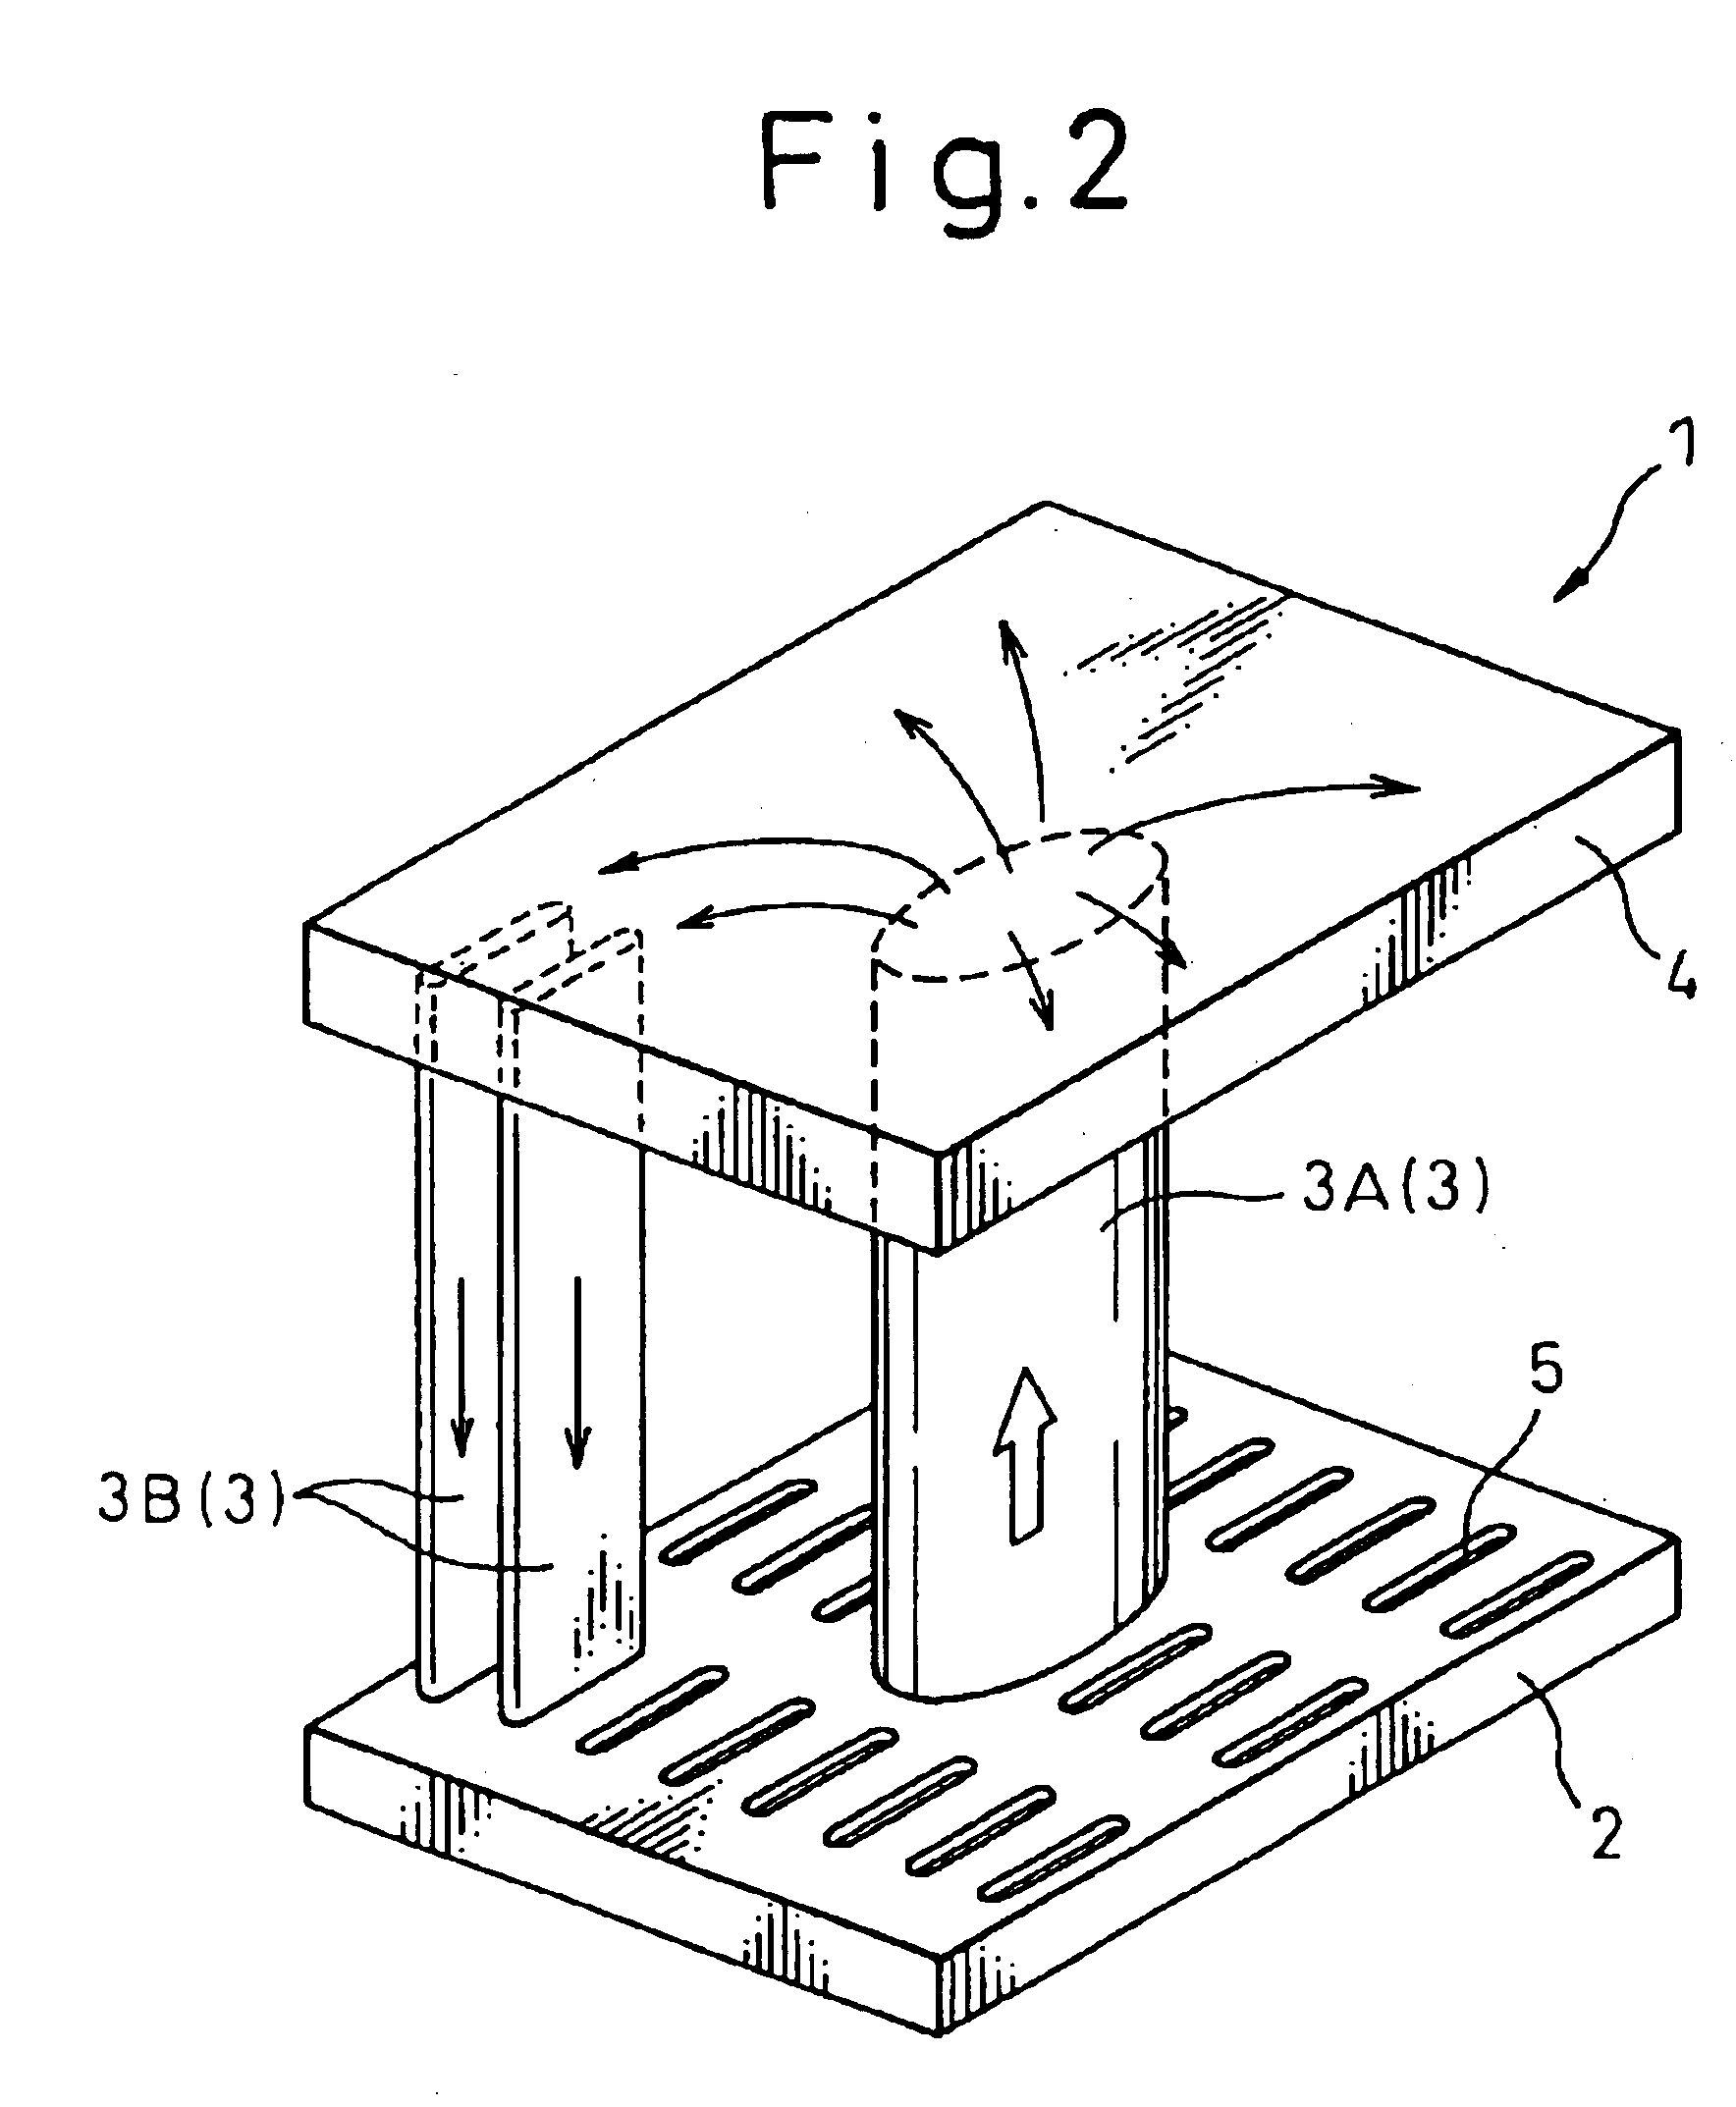 Cooling apparatus boiling and condensing refrigerant with a refrigerant vapor passage having a large cross sectional area